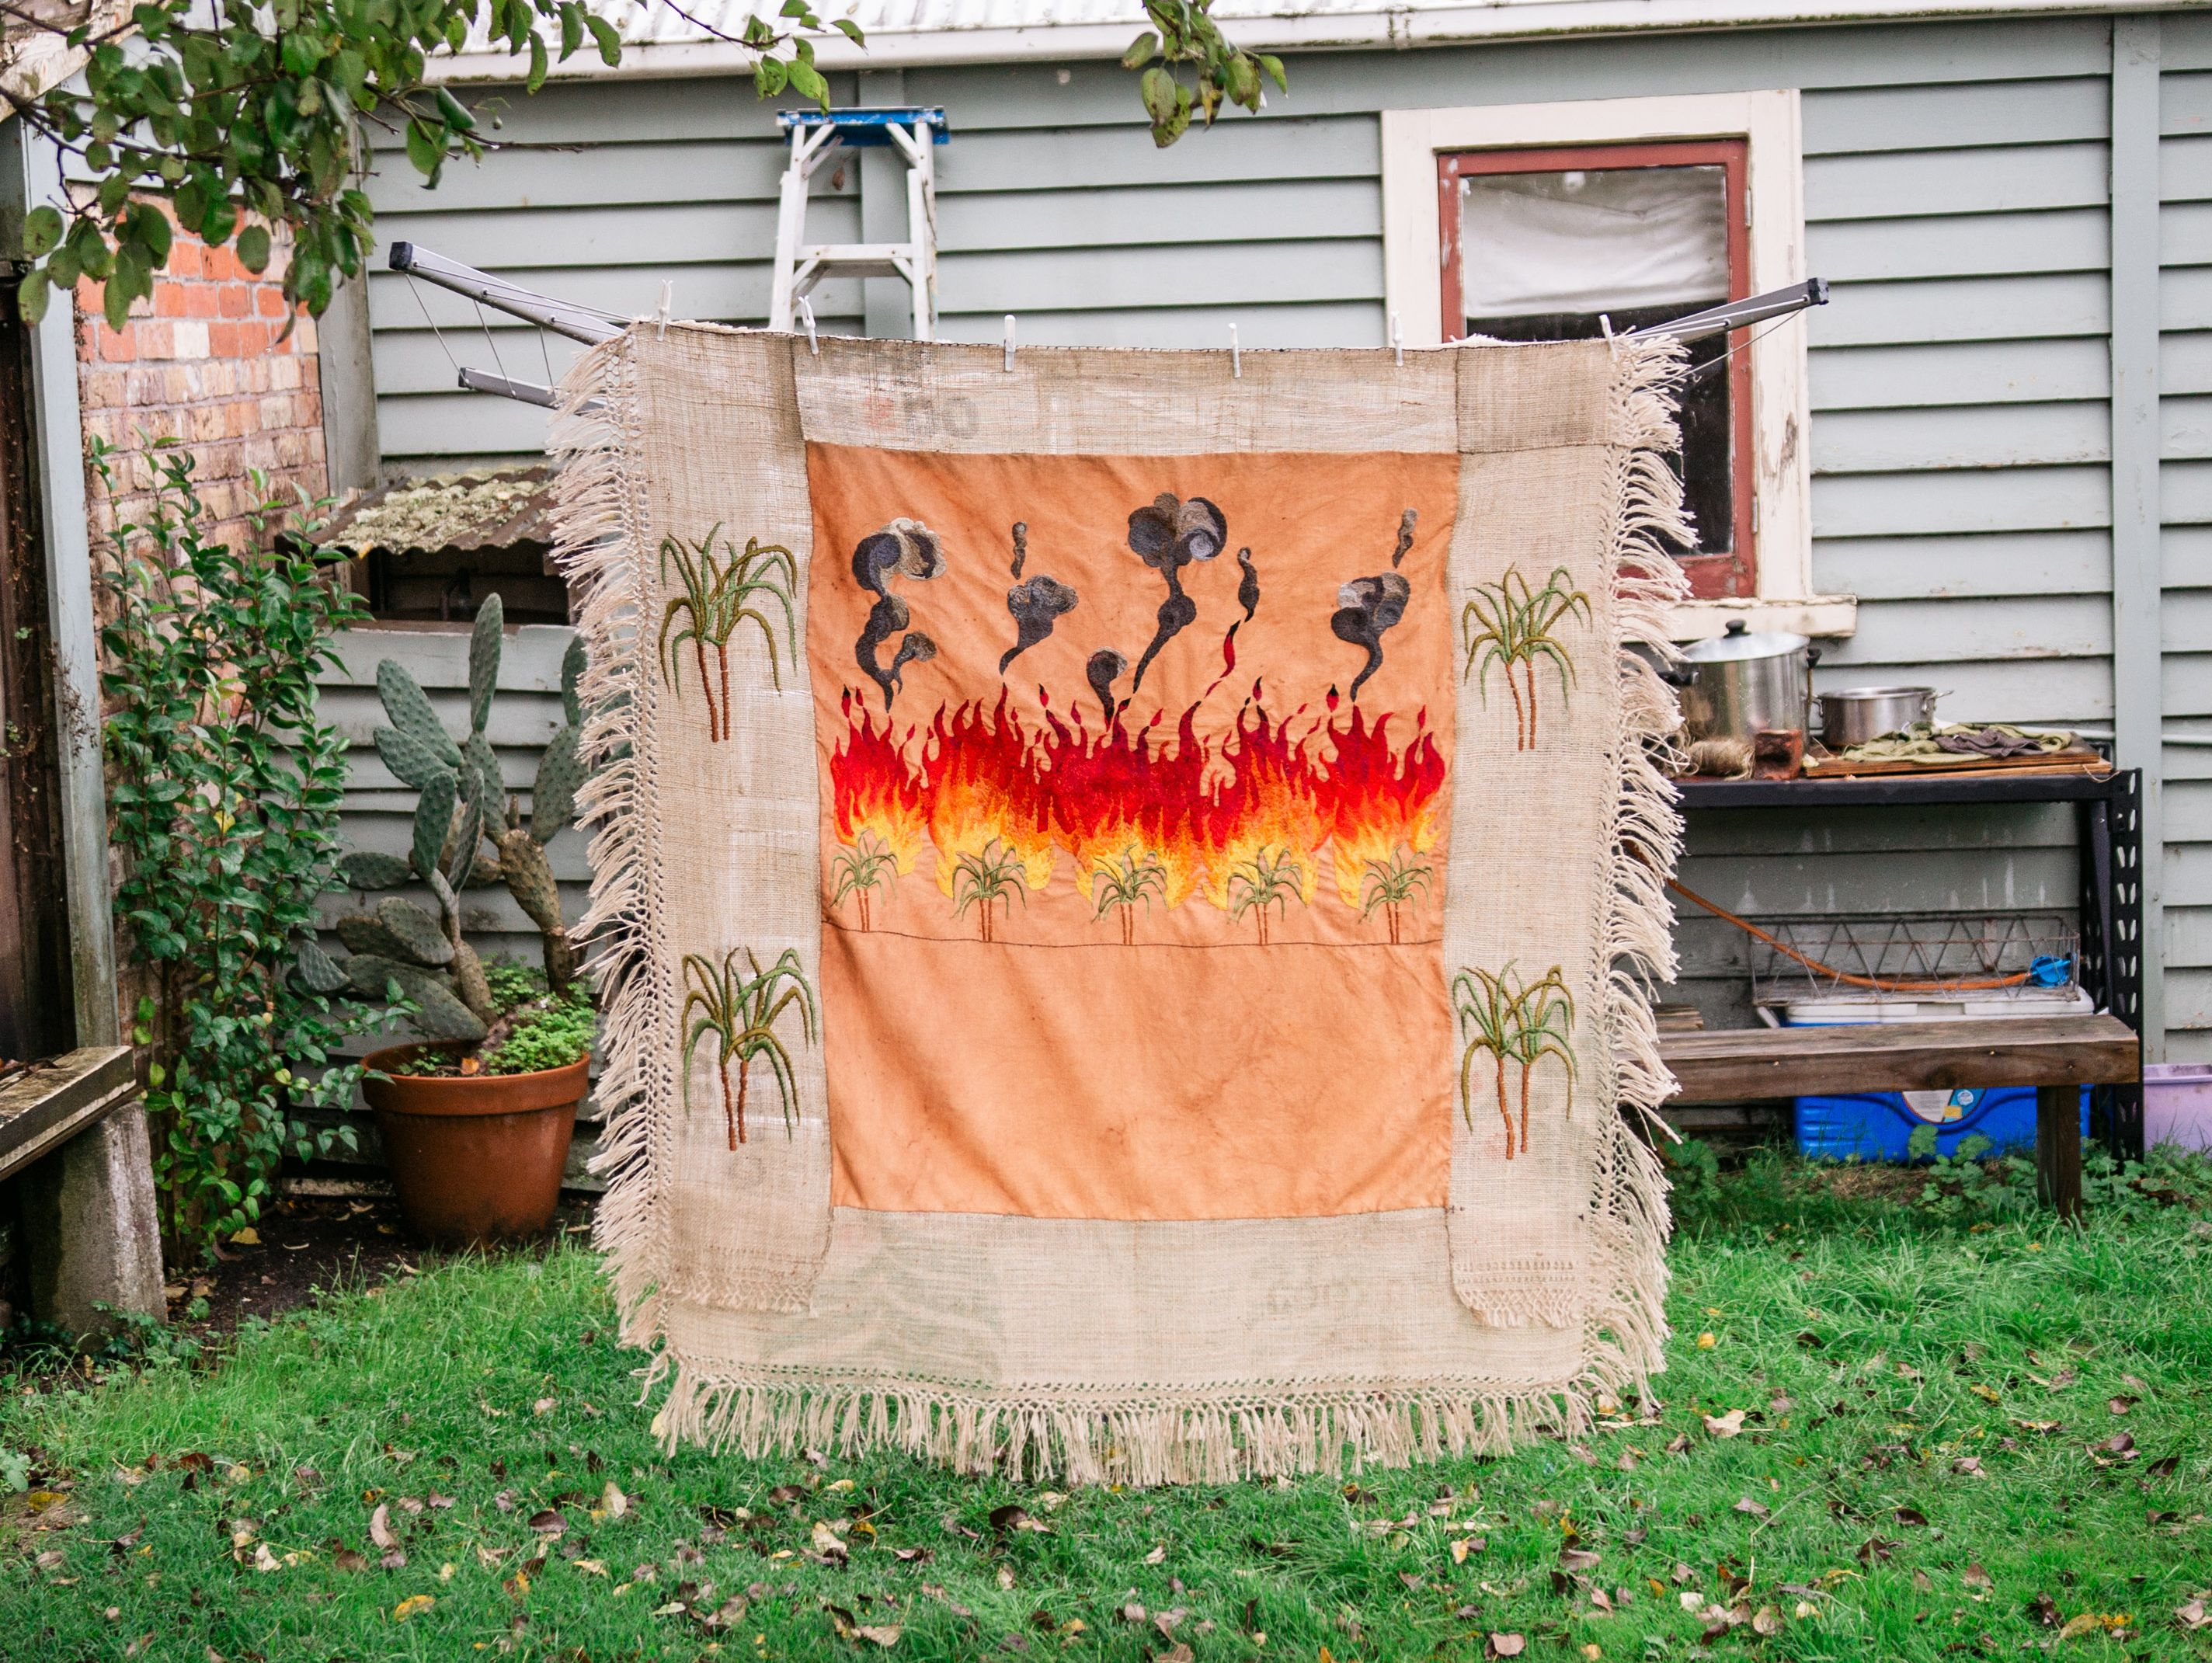 Quishile Charan, Burning Ganna Khet (Burning Sugarcane Farm), 2021, 153cm by 152cm. Technique: hand dyed textile, embroidery thread, cotton, hessian sacks. Textile is naturally dyed with avocado seeds. Image by Matavai Taulangau.